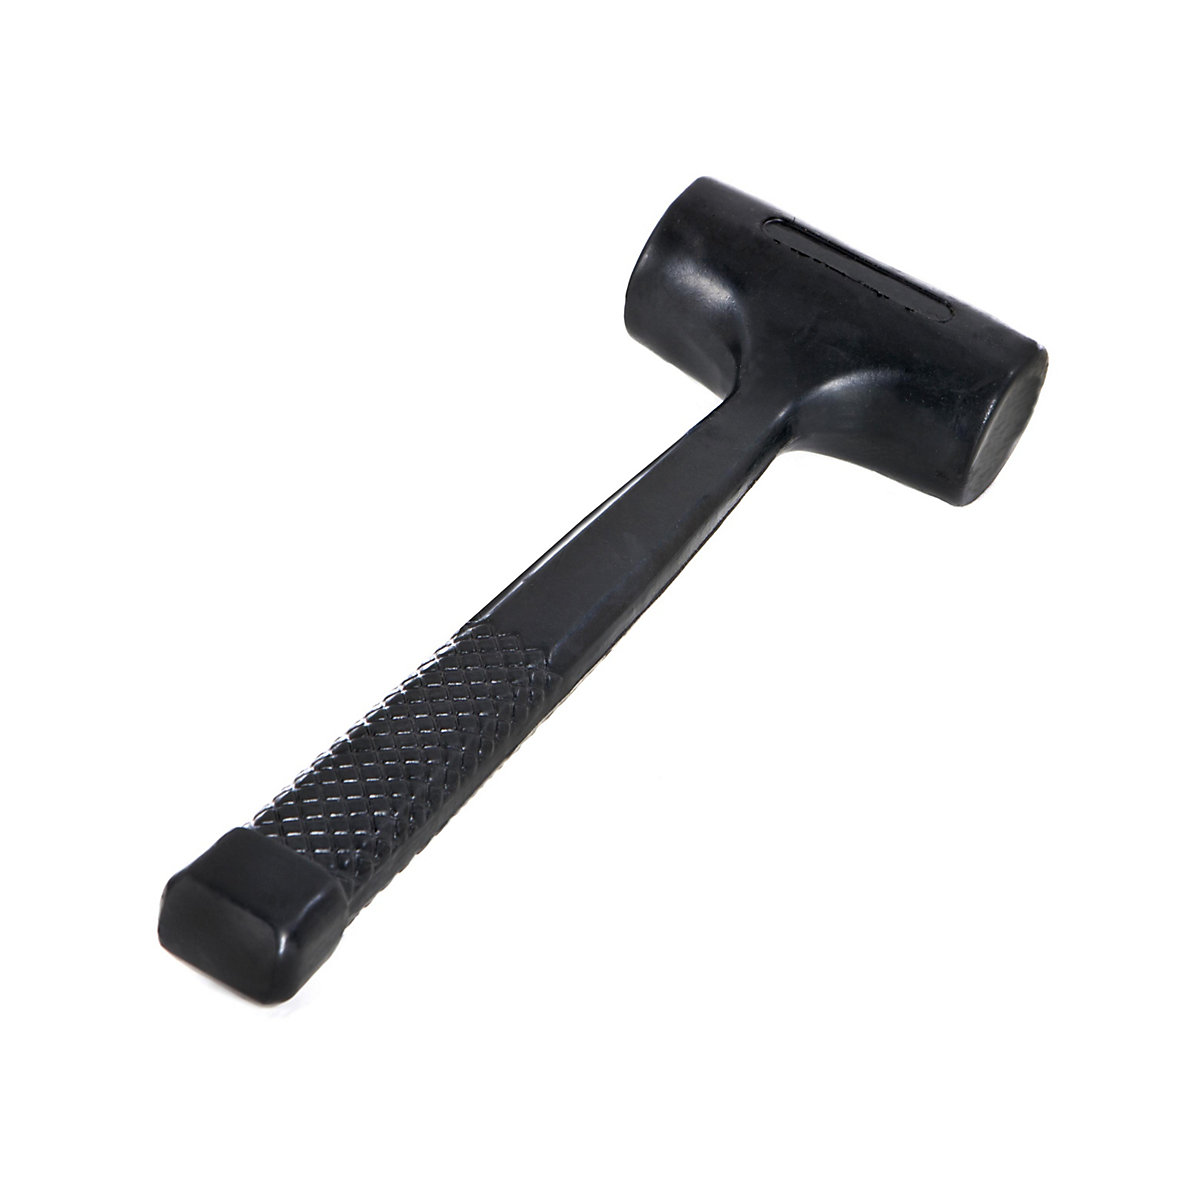 Rubber assembly mallet